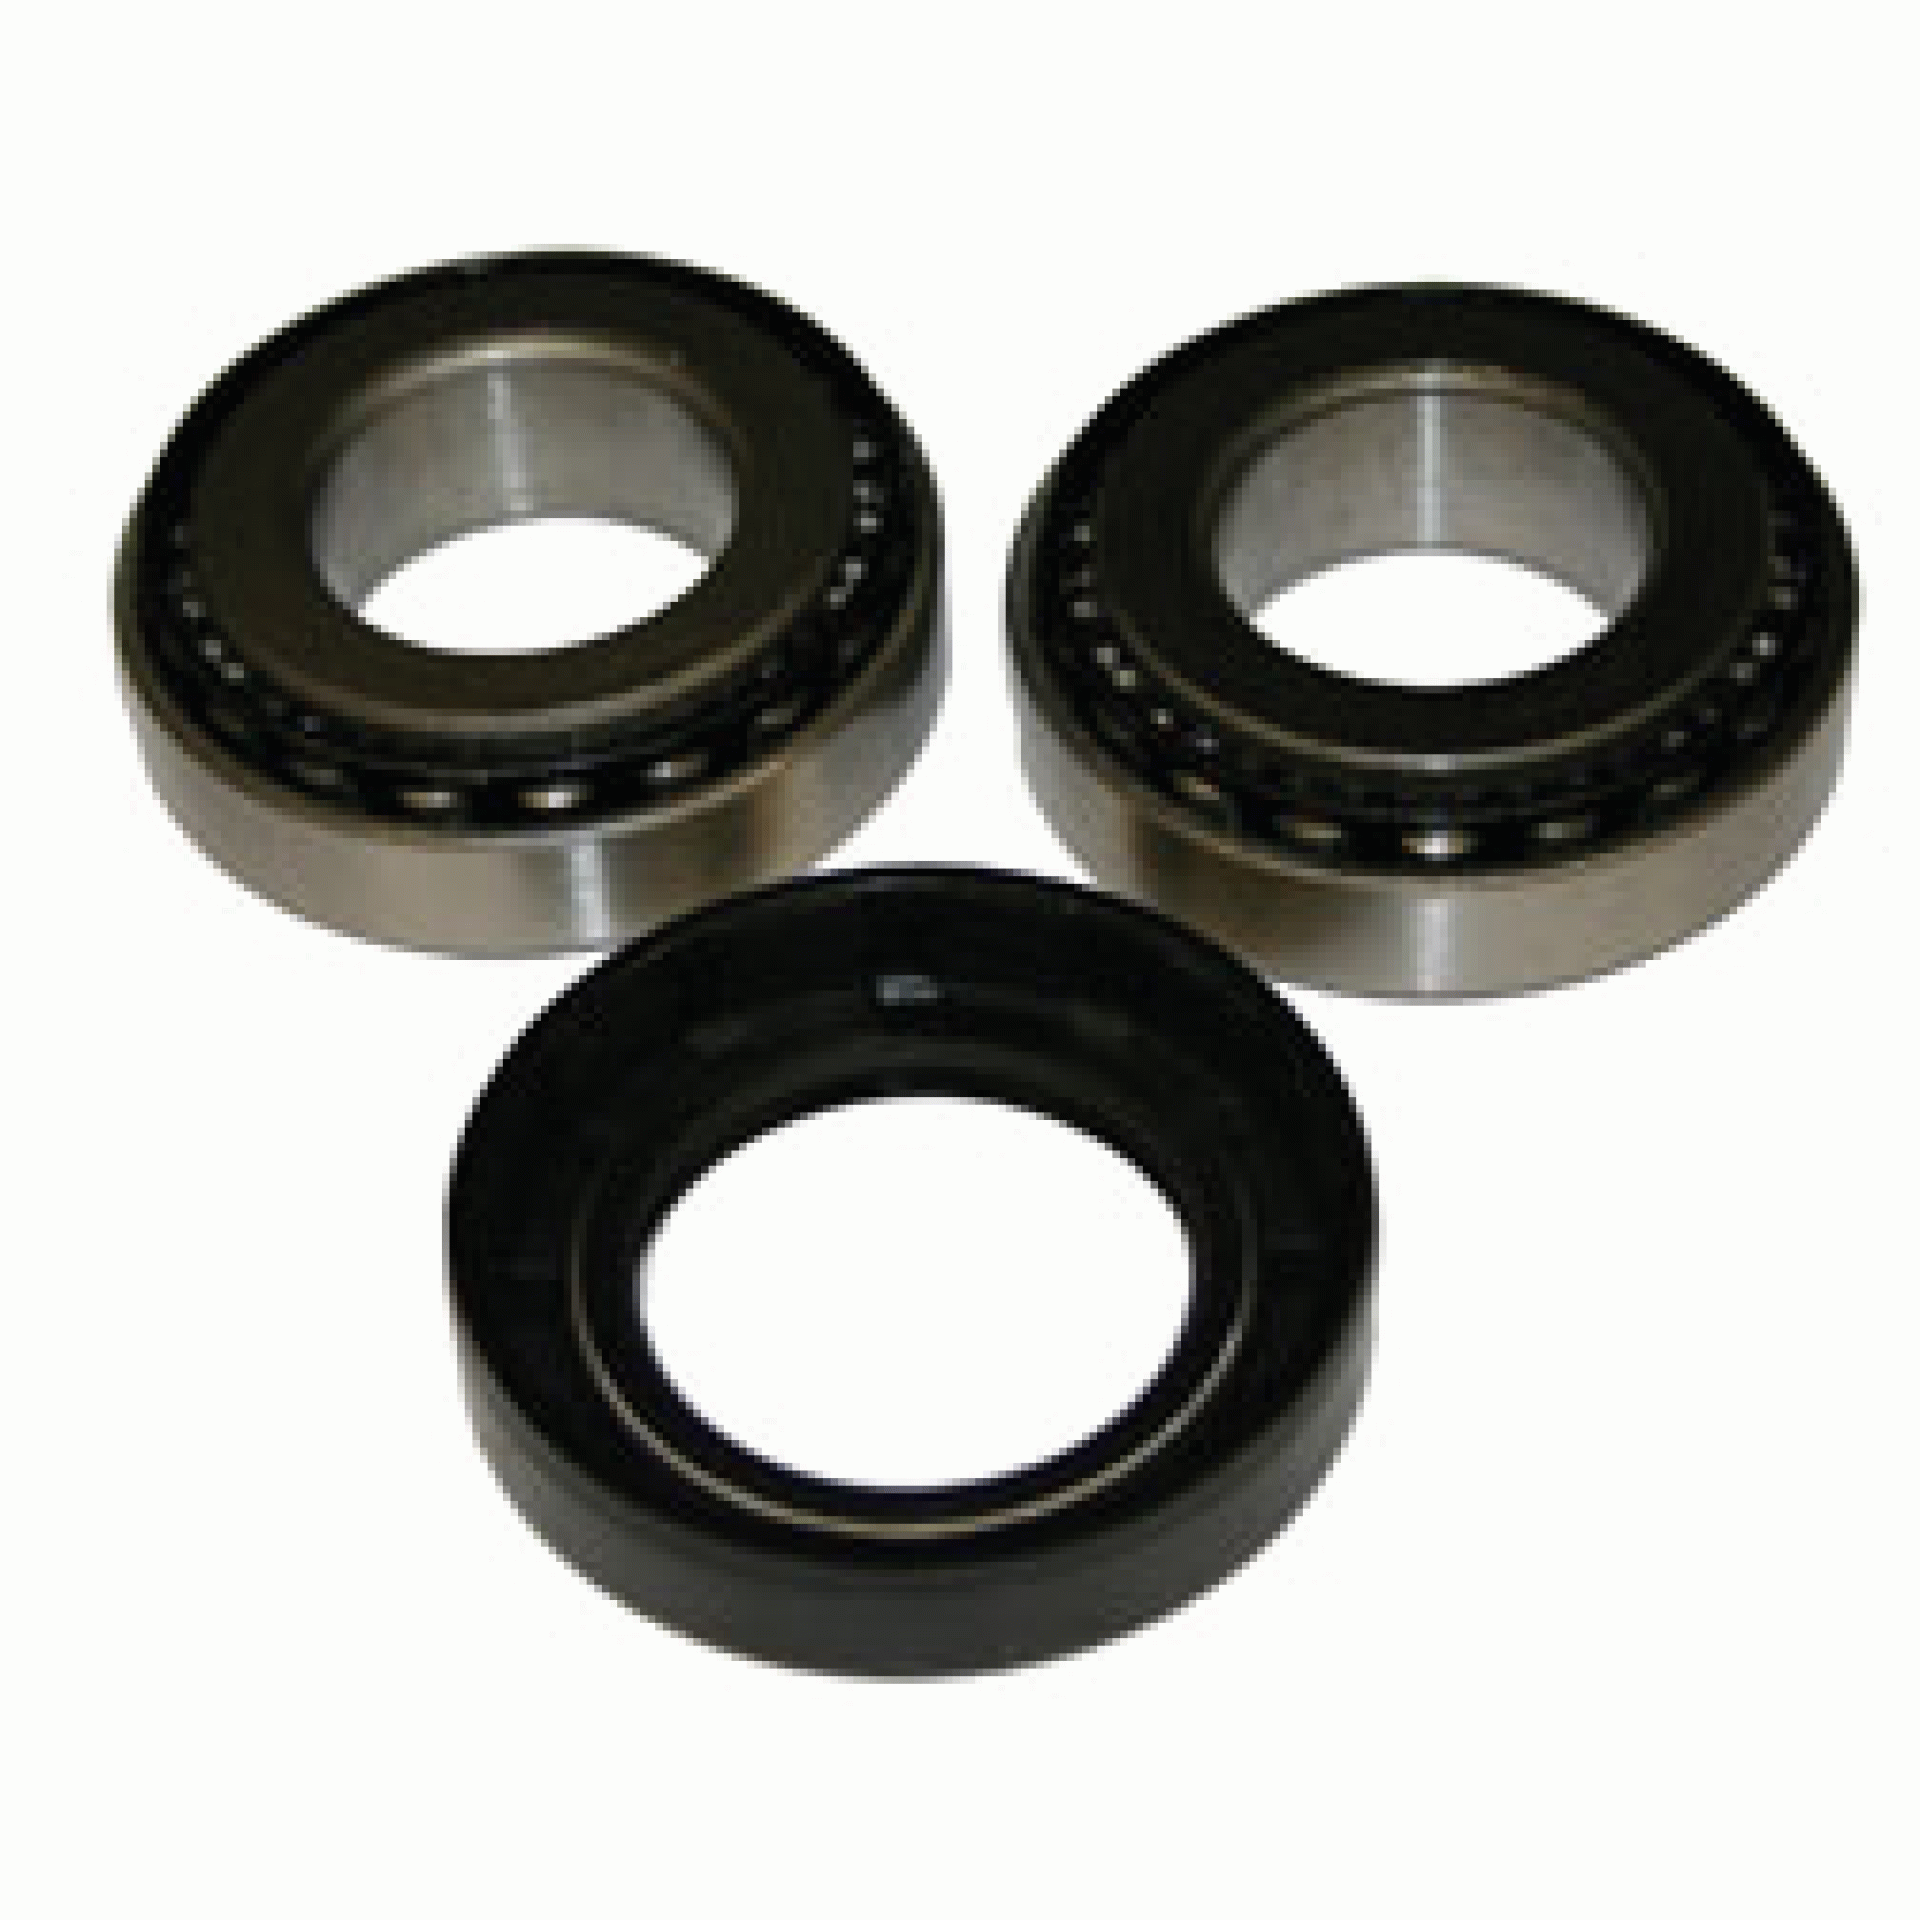 DEXTER MARINE PRODUCTS OF GEORGIA LC | K71-G02-33 | BEARING KIT- 1-1/16" STRAIGHT SPINDLE W/O DUST CAP L44649 CONE L44610 CUP